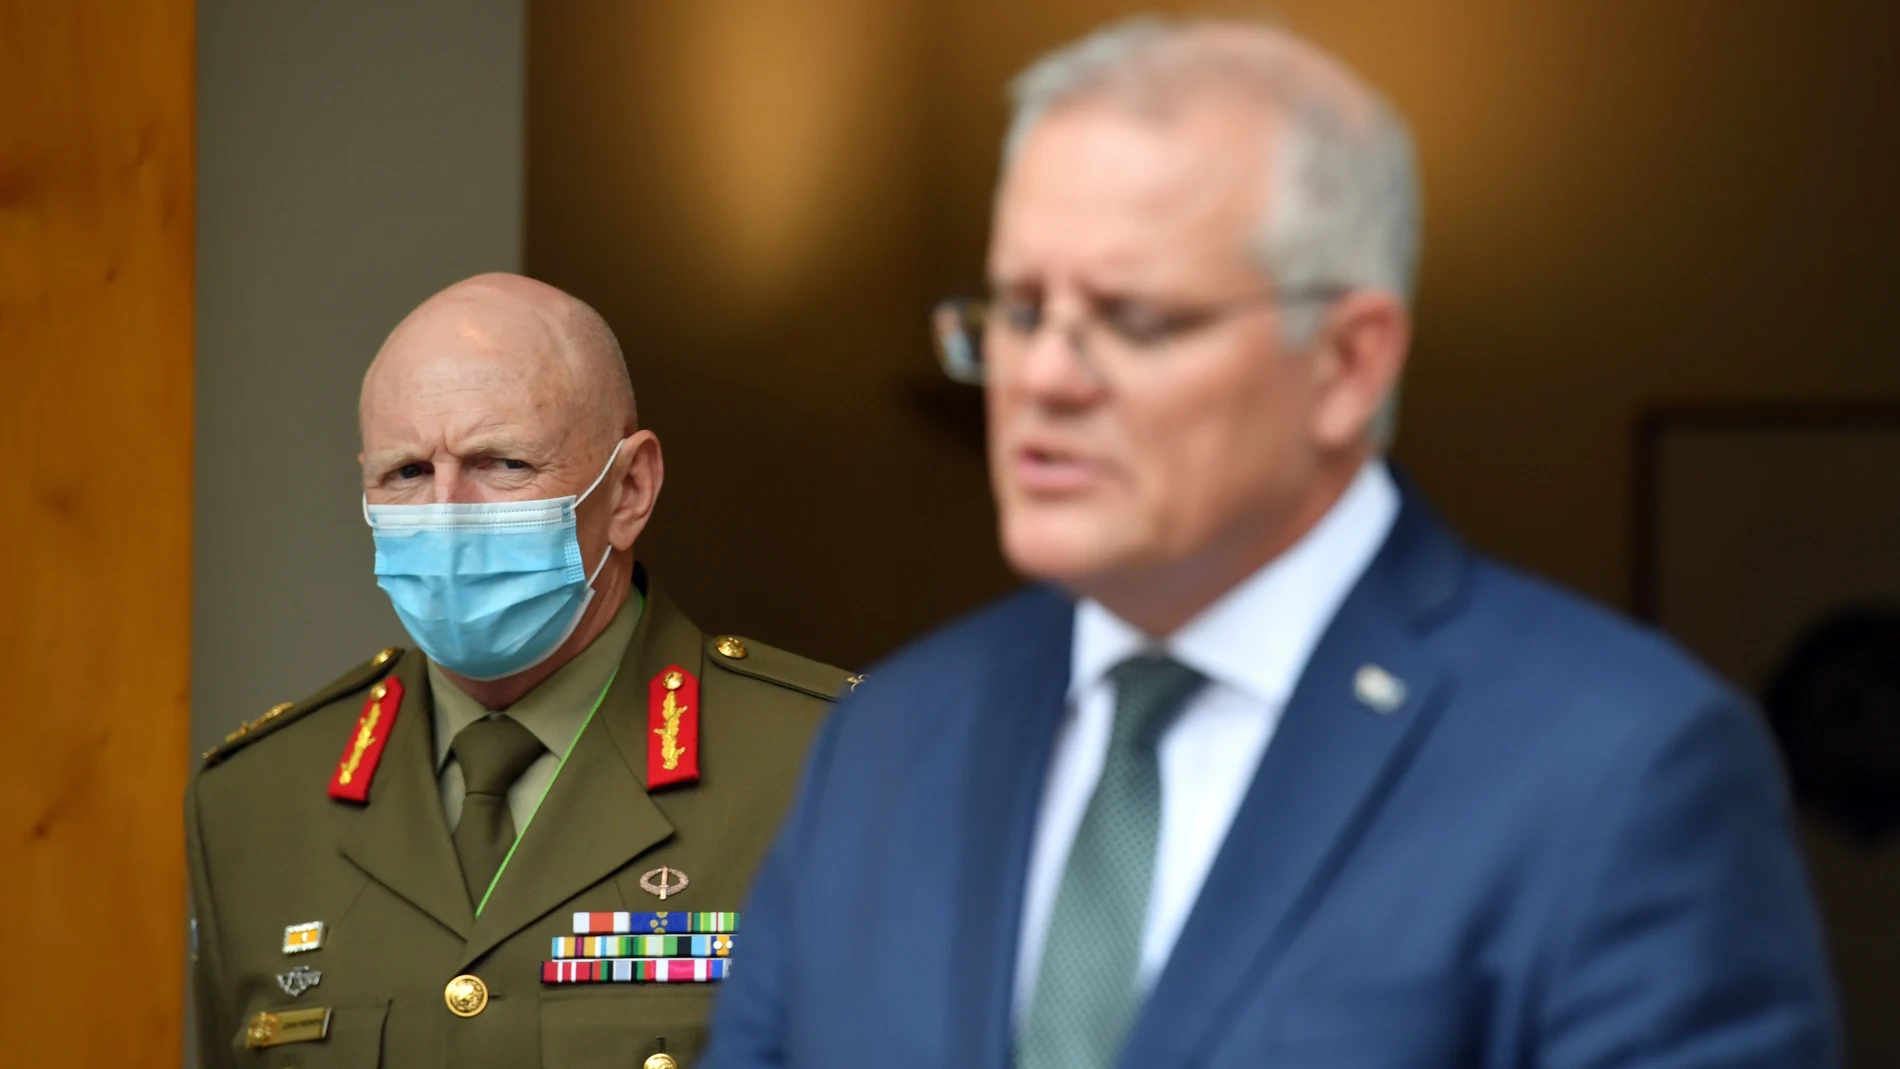 Canberra (Australia), 20/01/2022.- Covid-19 Taskforce Commander, Lieutenant General John Frewen (L) and Prime Minister Scott Morrison (R) during a press conference at Parliament House in Canberra, Australia, 20 January 2022. EFE/EPA/MICK TSIKAS AUSTRALIA AND NEW ZEALAND OUT